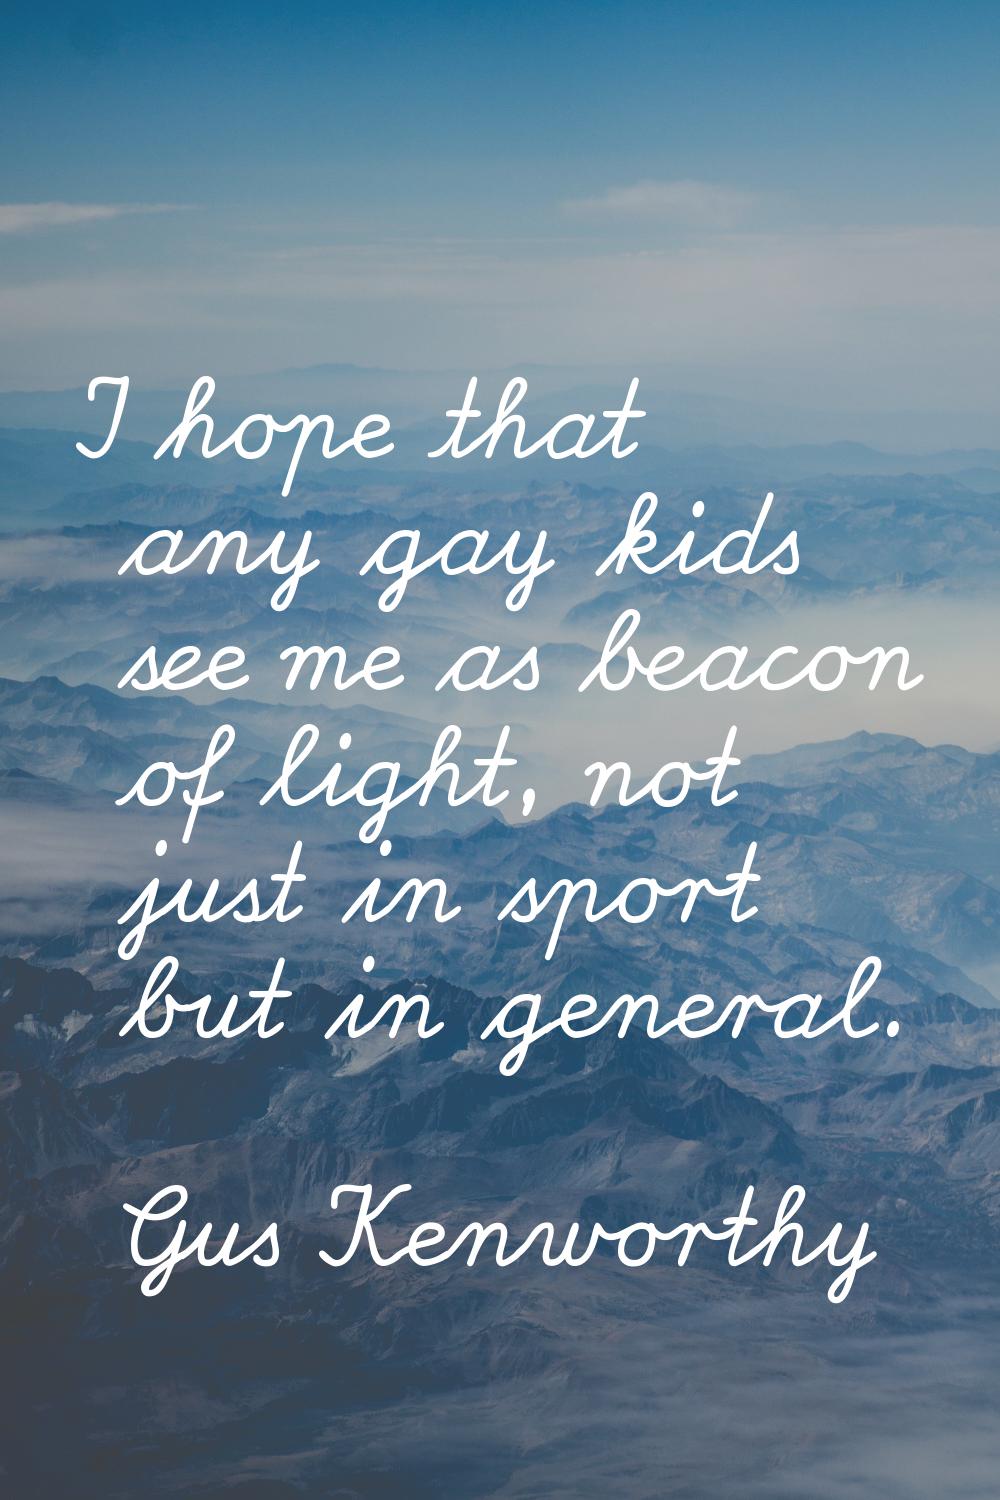 I hope that any gay kids see me as beacon of light, not just in sport but in general.